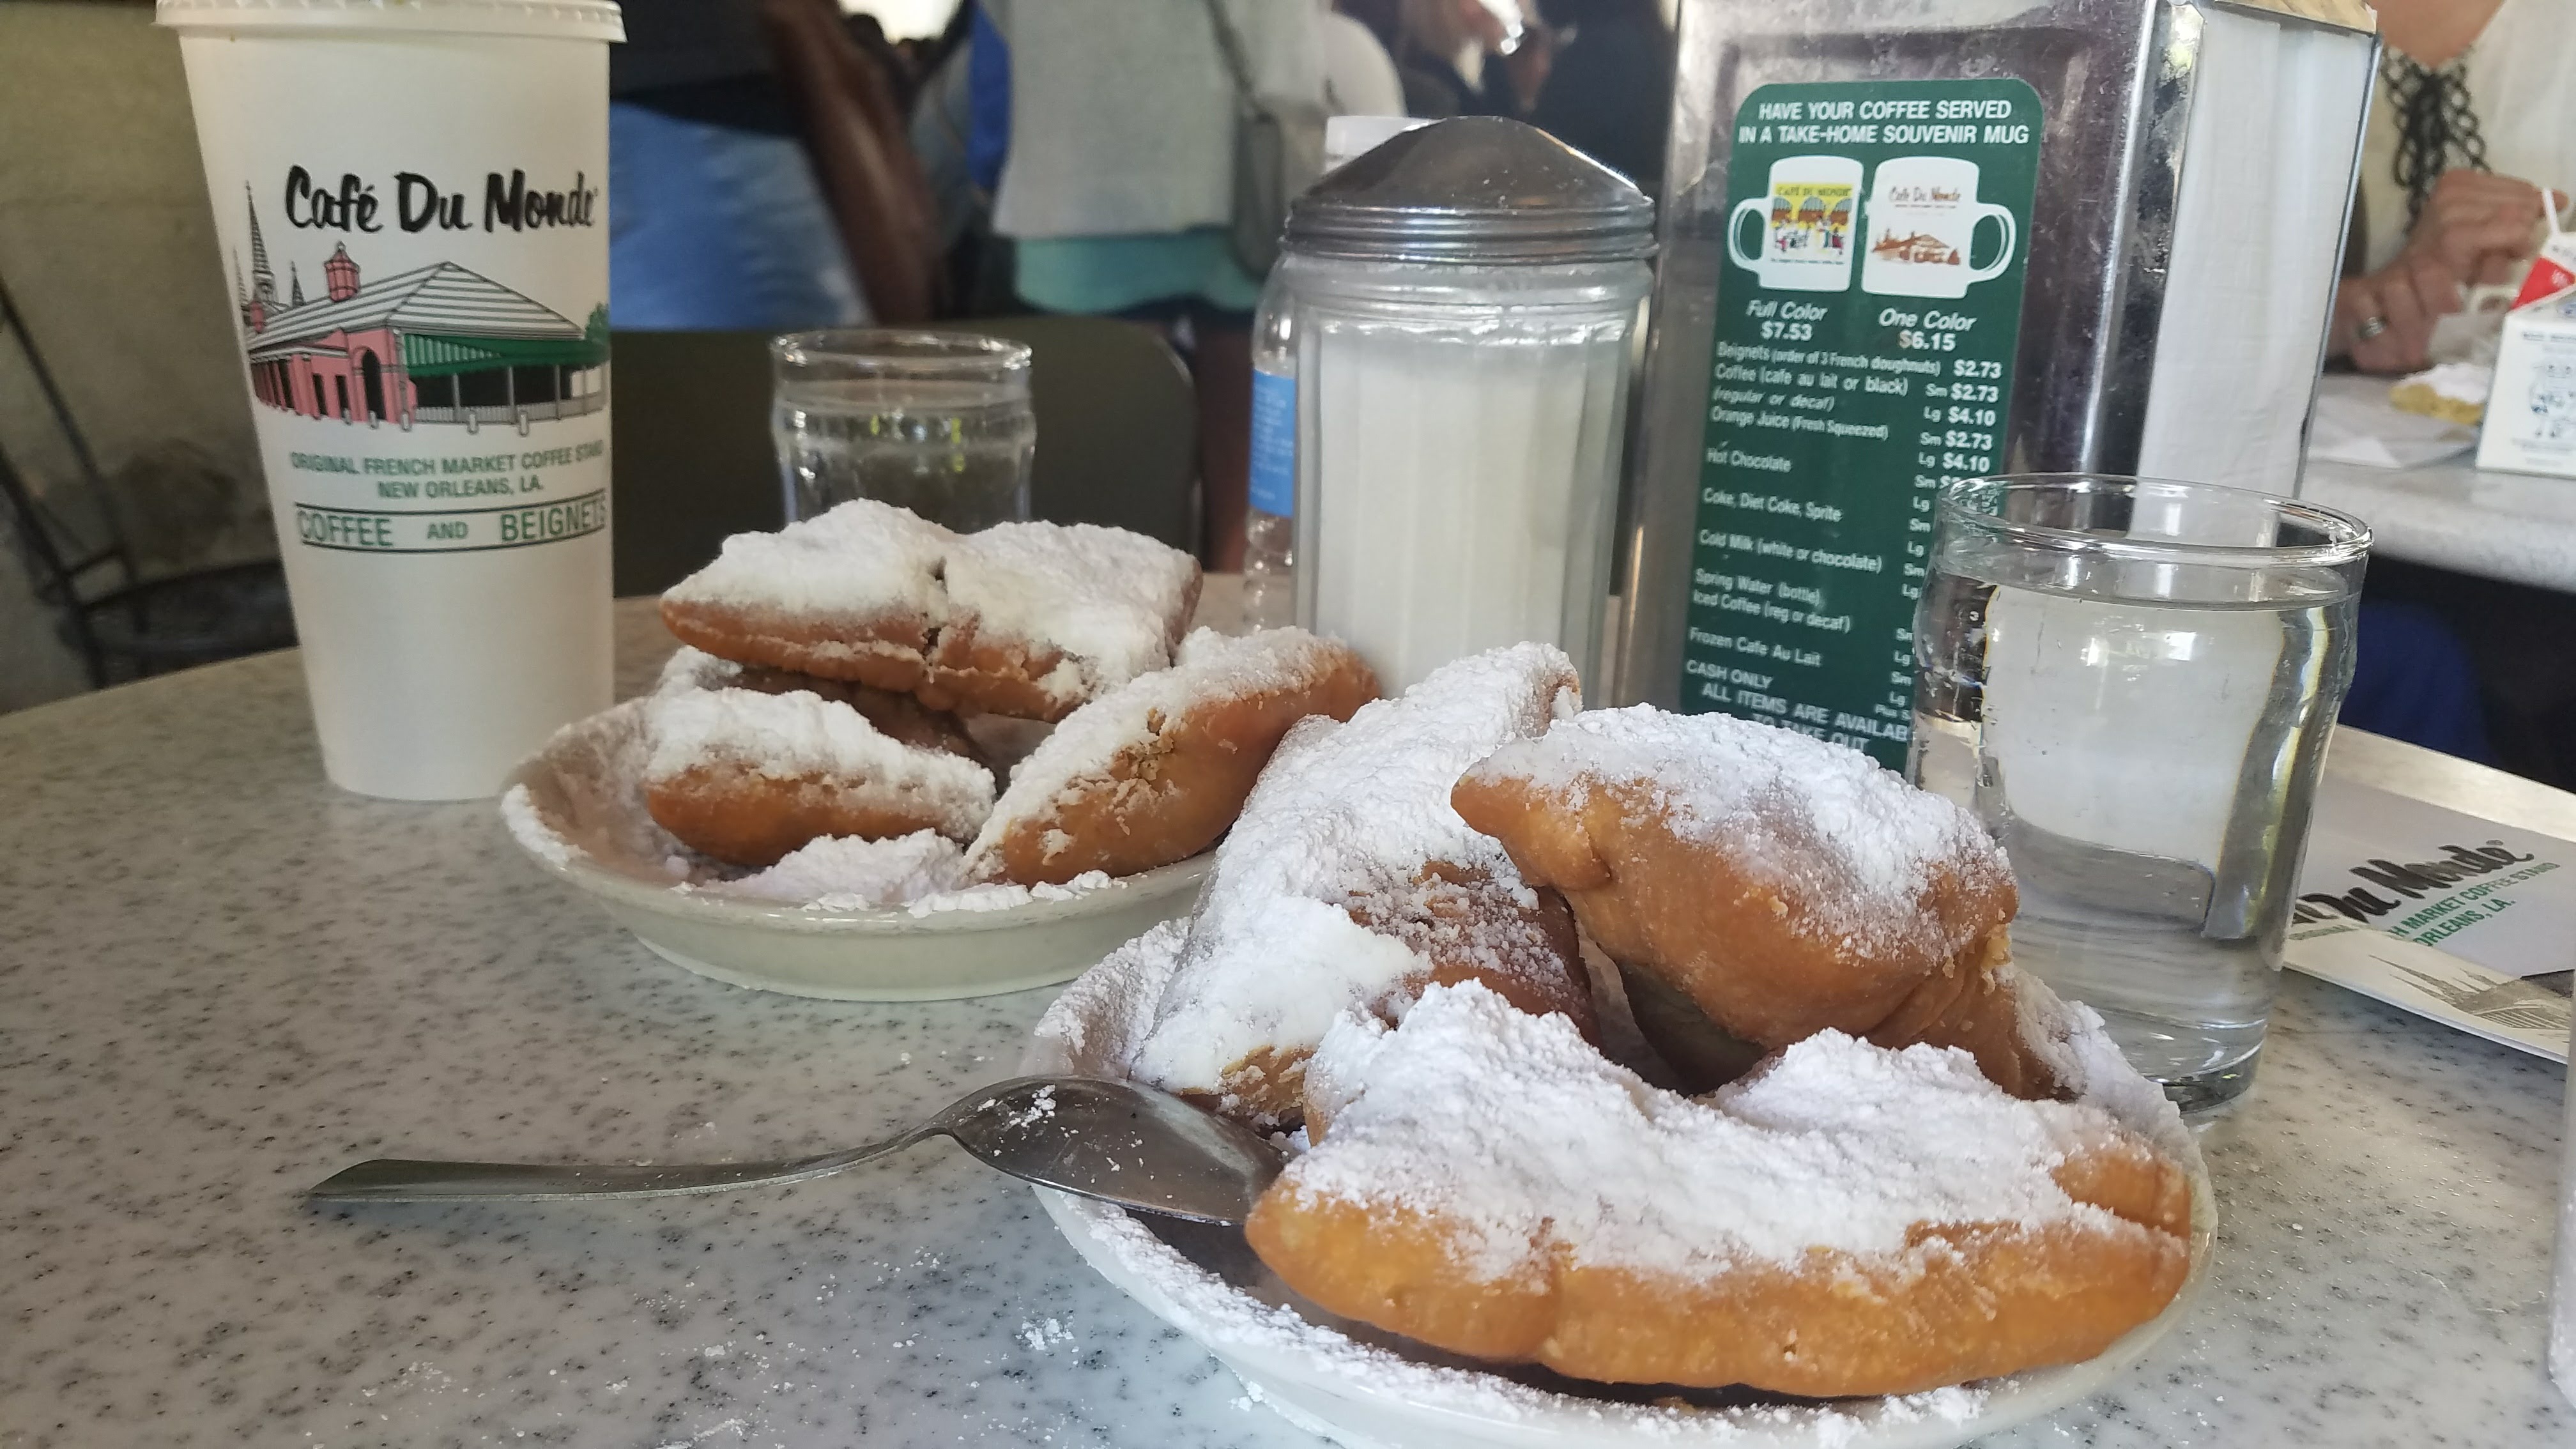 New Orleans Eats: A Review